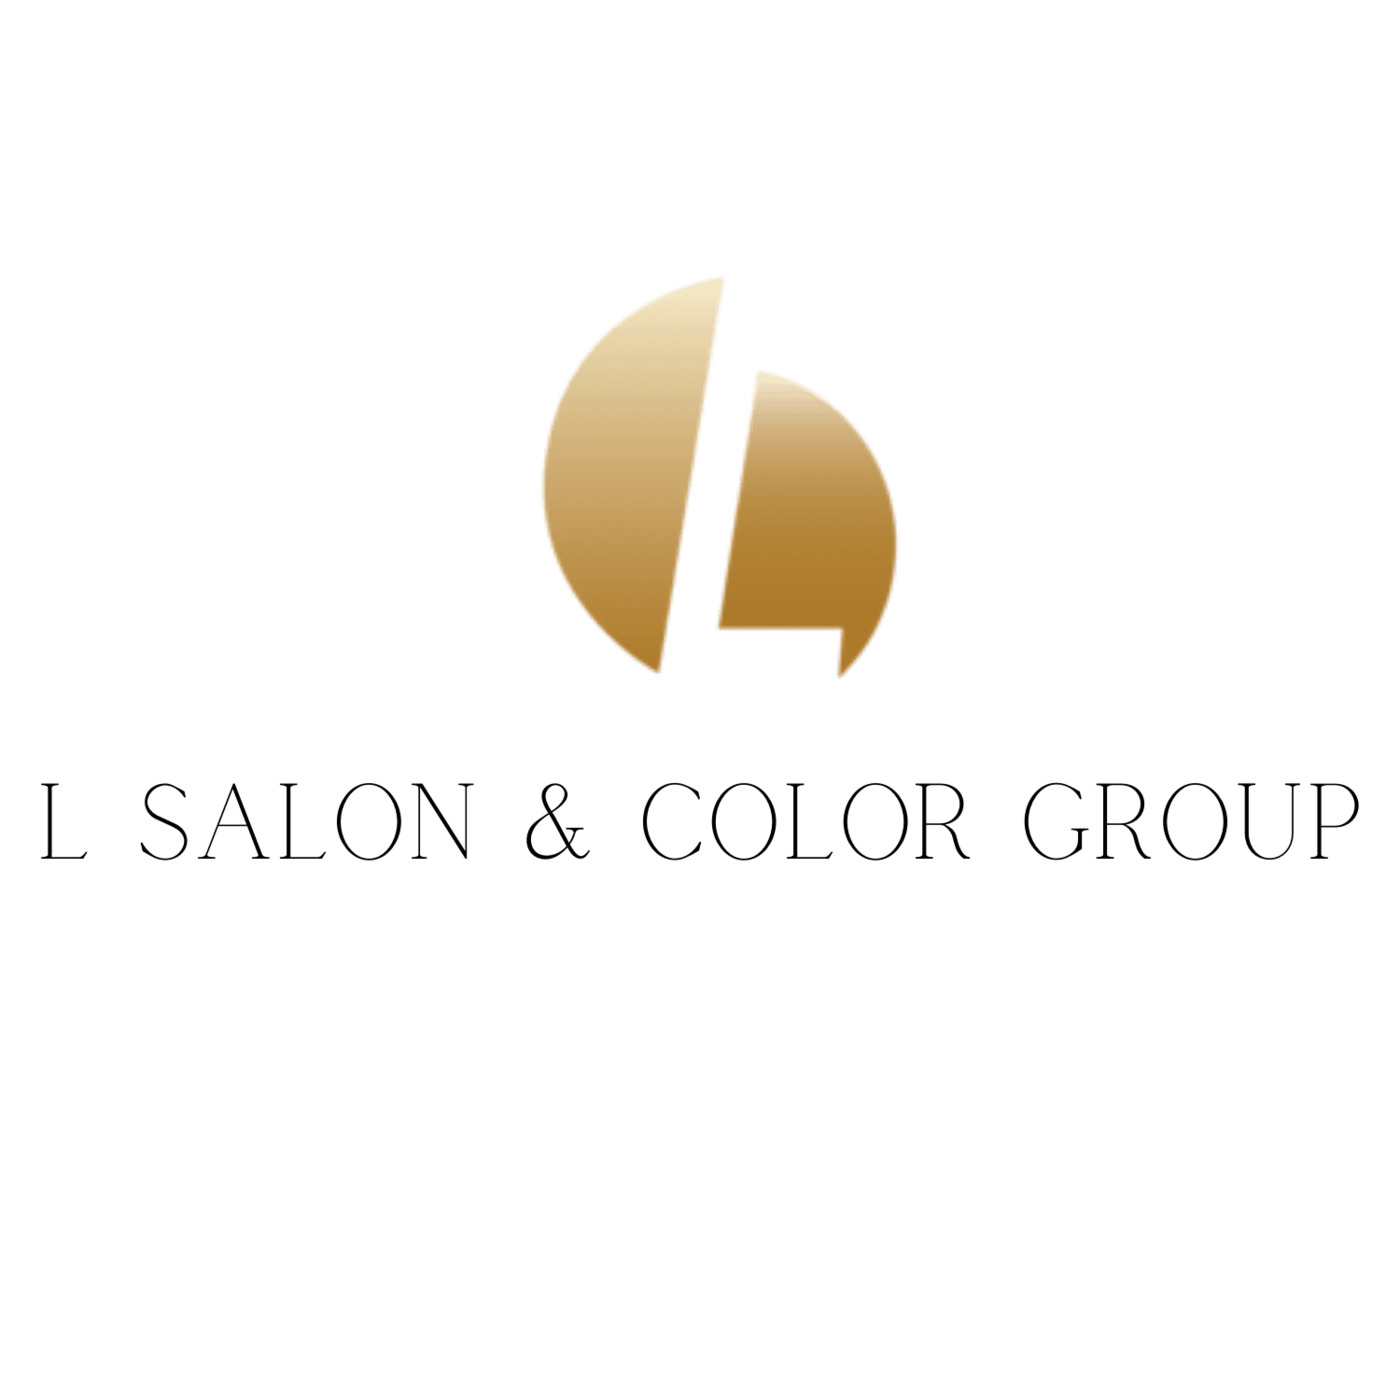 L Salon and Color Group is a full-service San Mateo hair salon offering professional hair color, styling, extensions, haircut, and makeup services for men and women in the Bay Area.